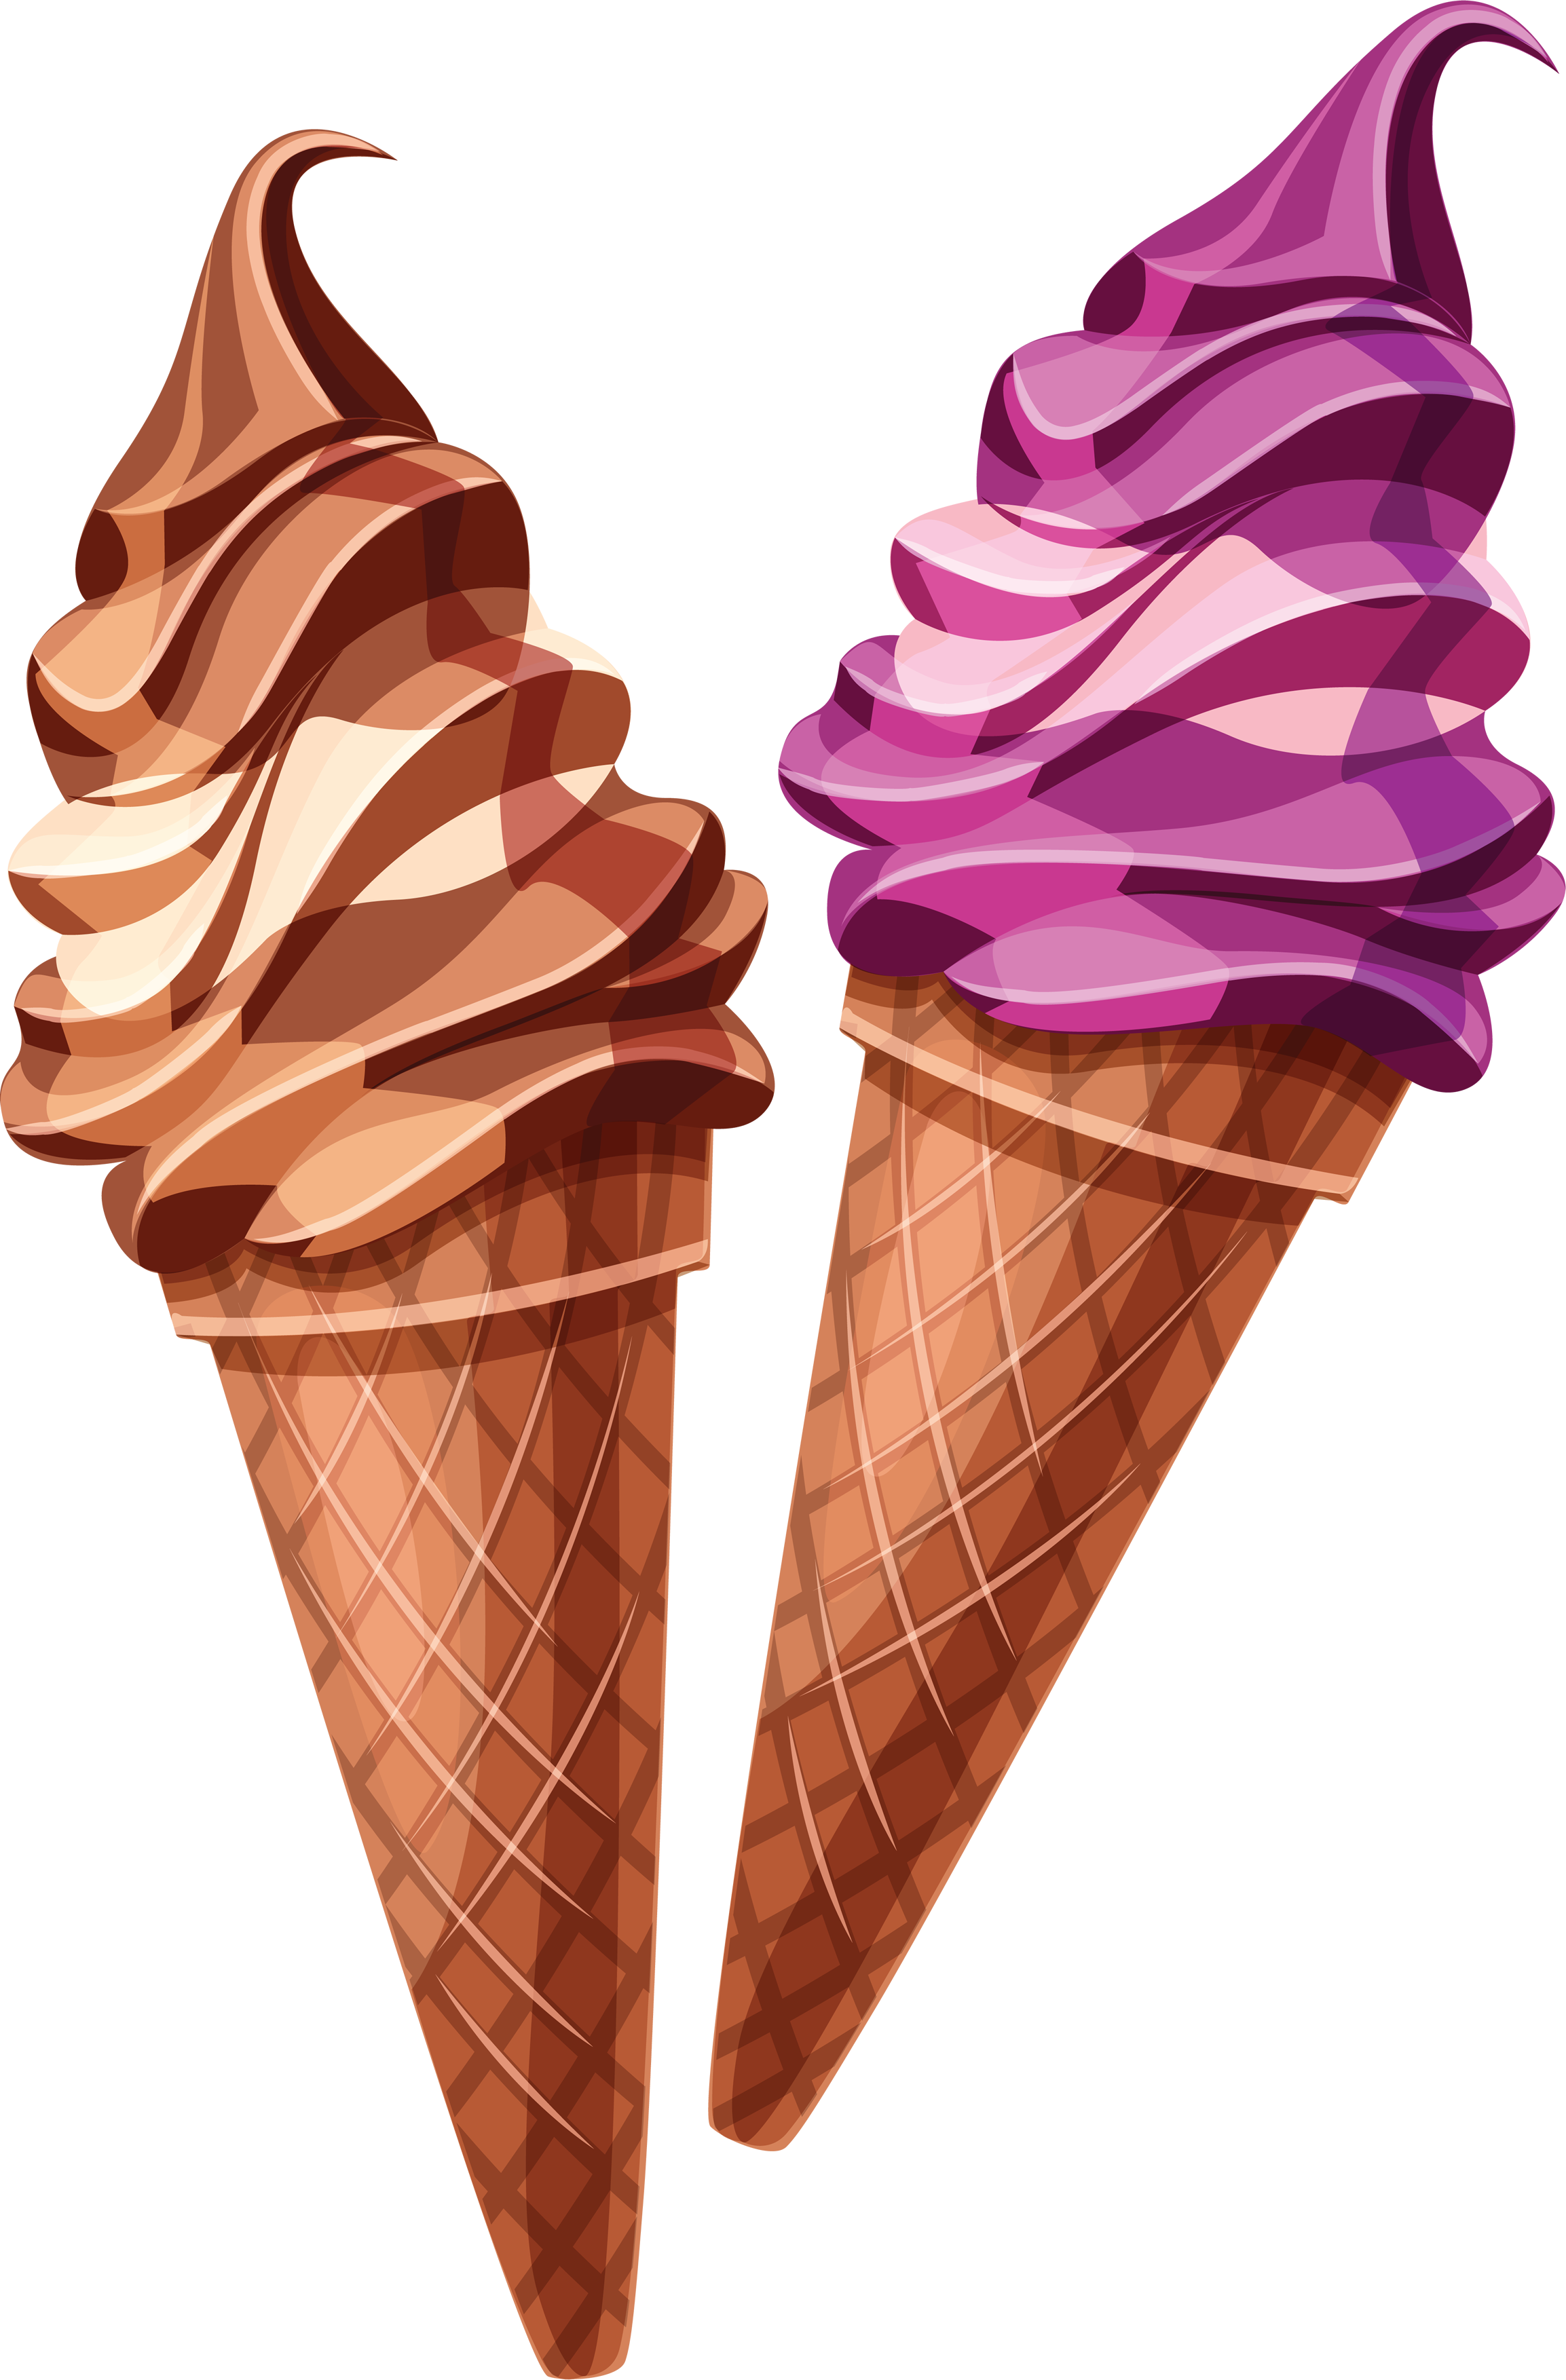 Ice cream free kavalabeauty. Cold clipart cold food